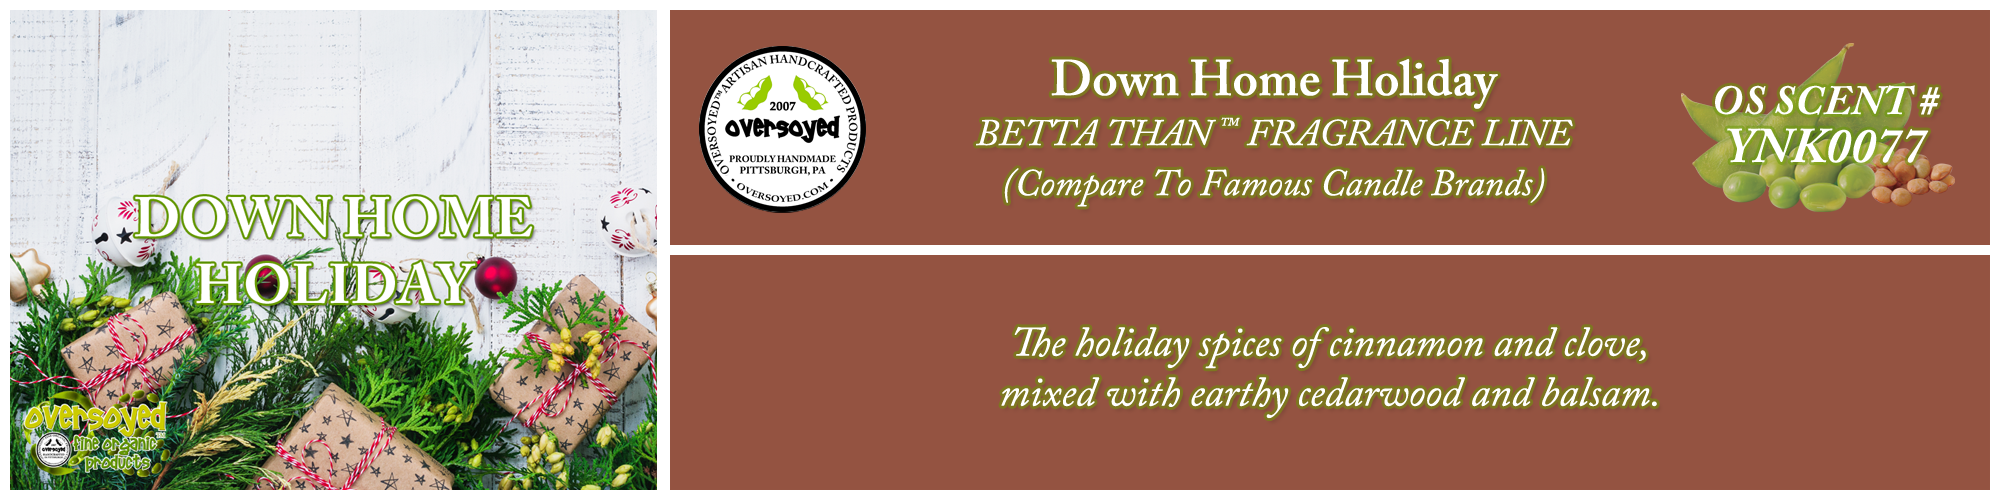 Down Home Holiday Handcrafted Products Collection